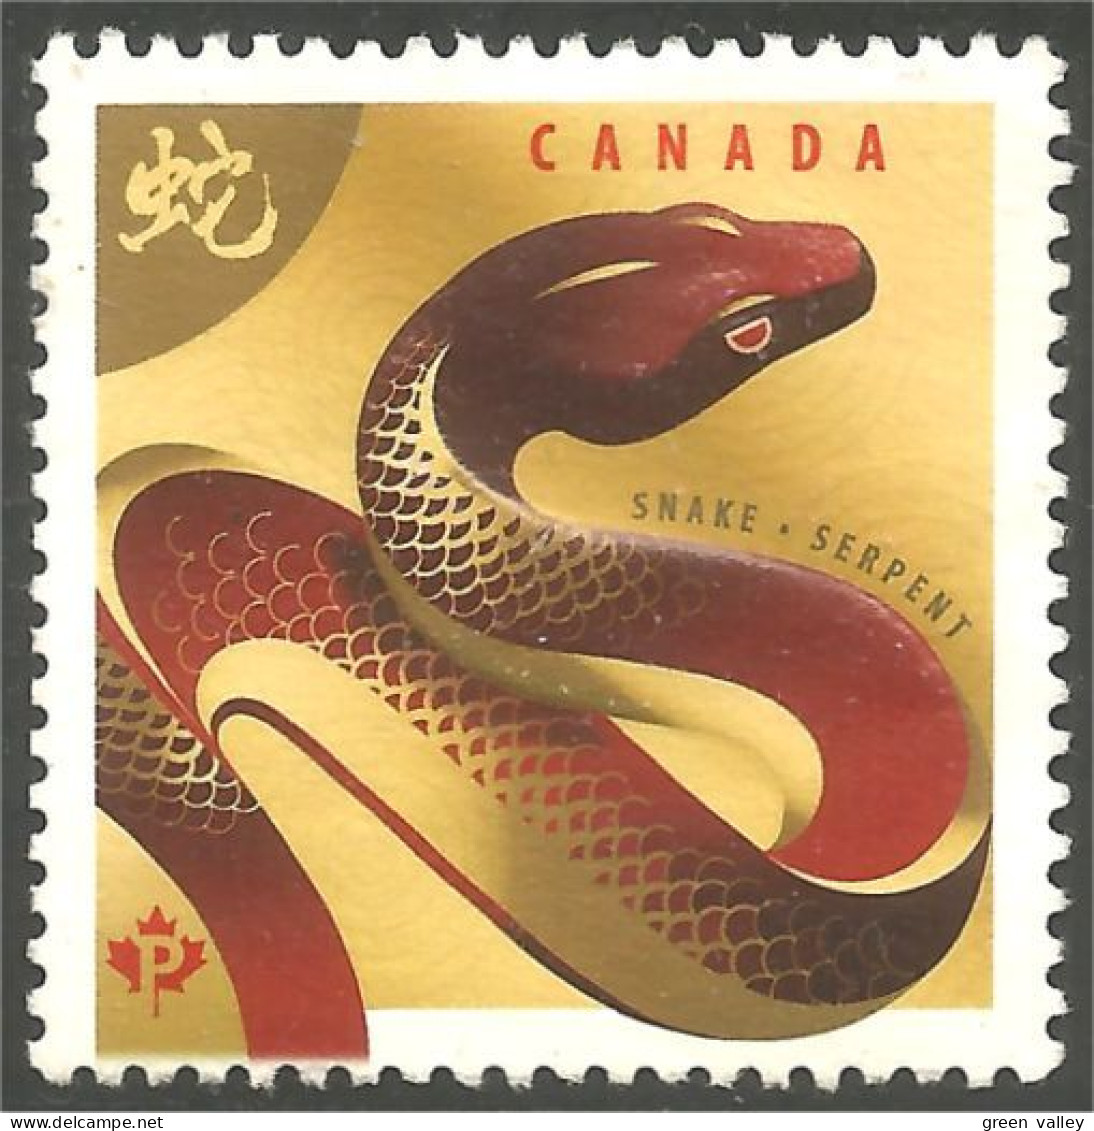 Canada Reptile Sepent Snake Année Chinoise Chinese Year Mint No Gum (348) - Serpenti